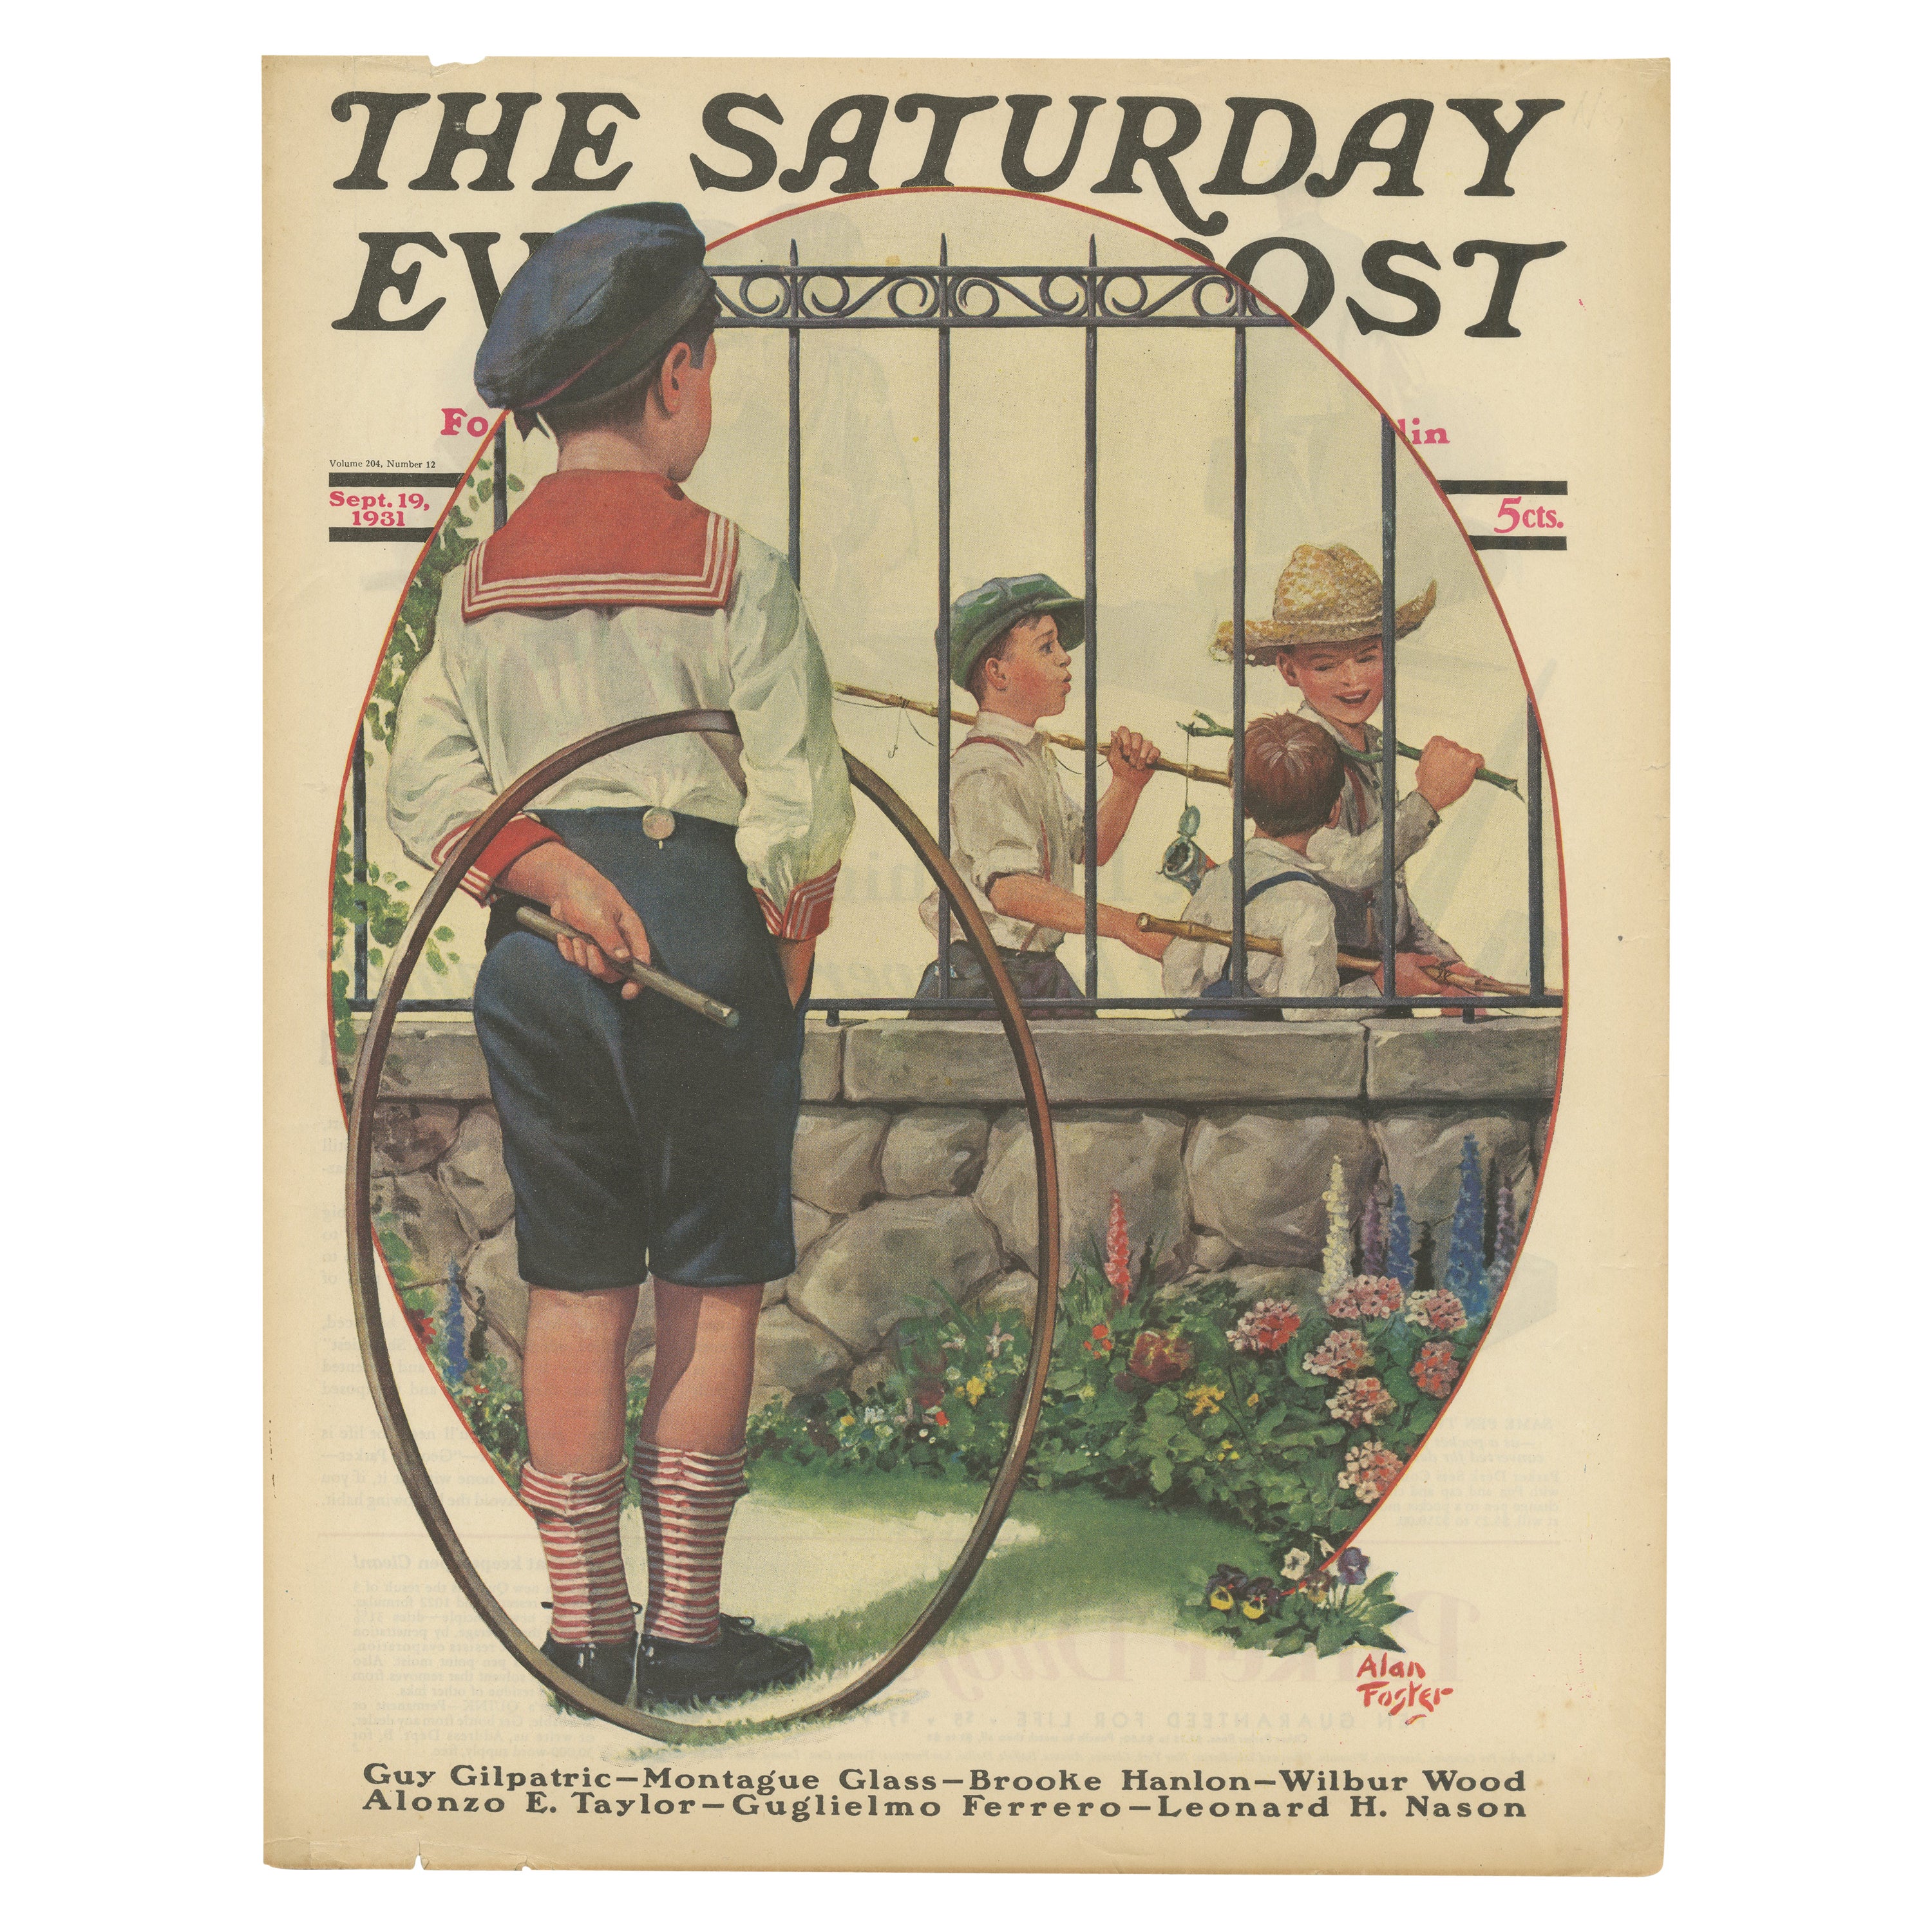 Vintage Print of a Boy with Hoop and Stick 'The Saturday Evening Post' 1931'